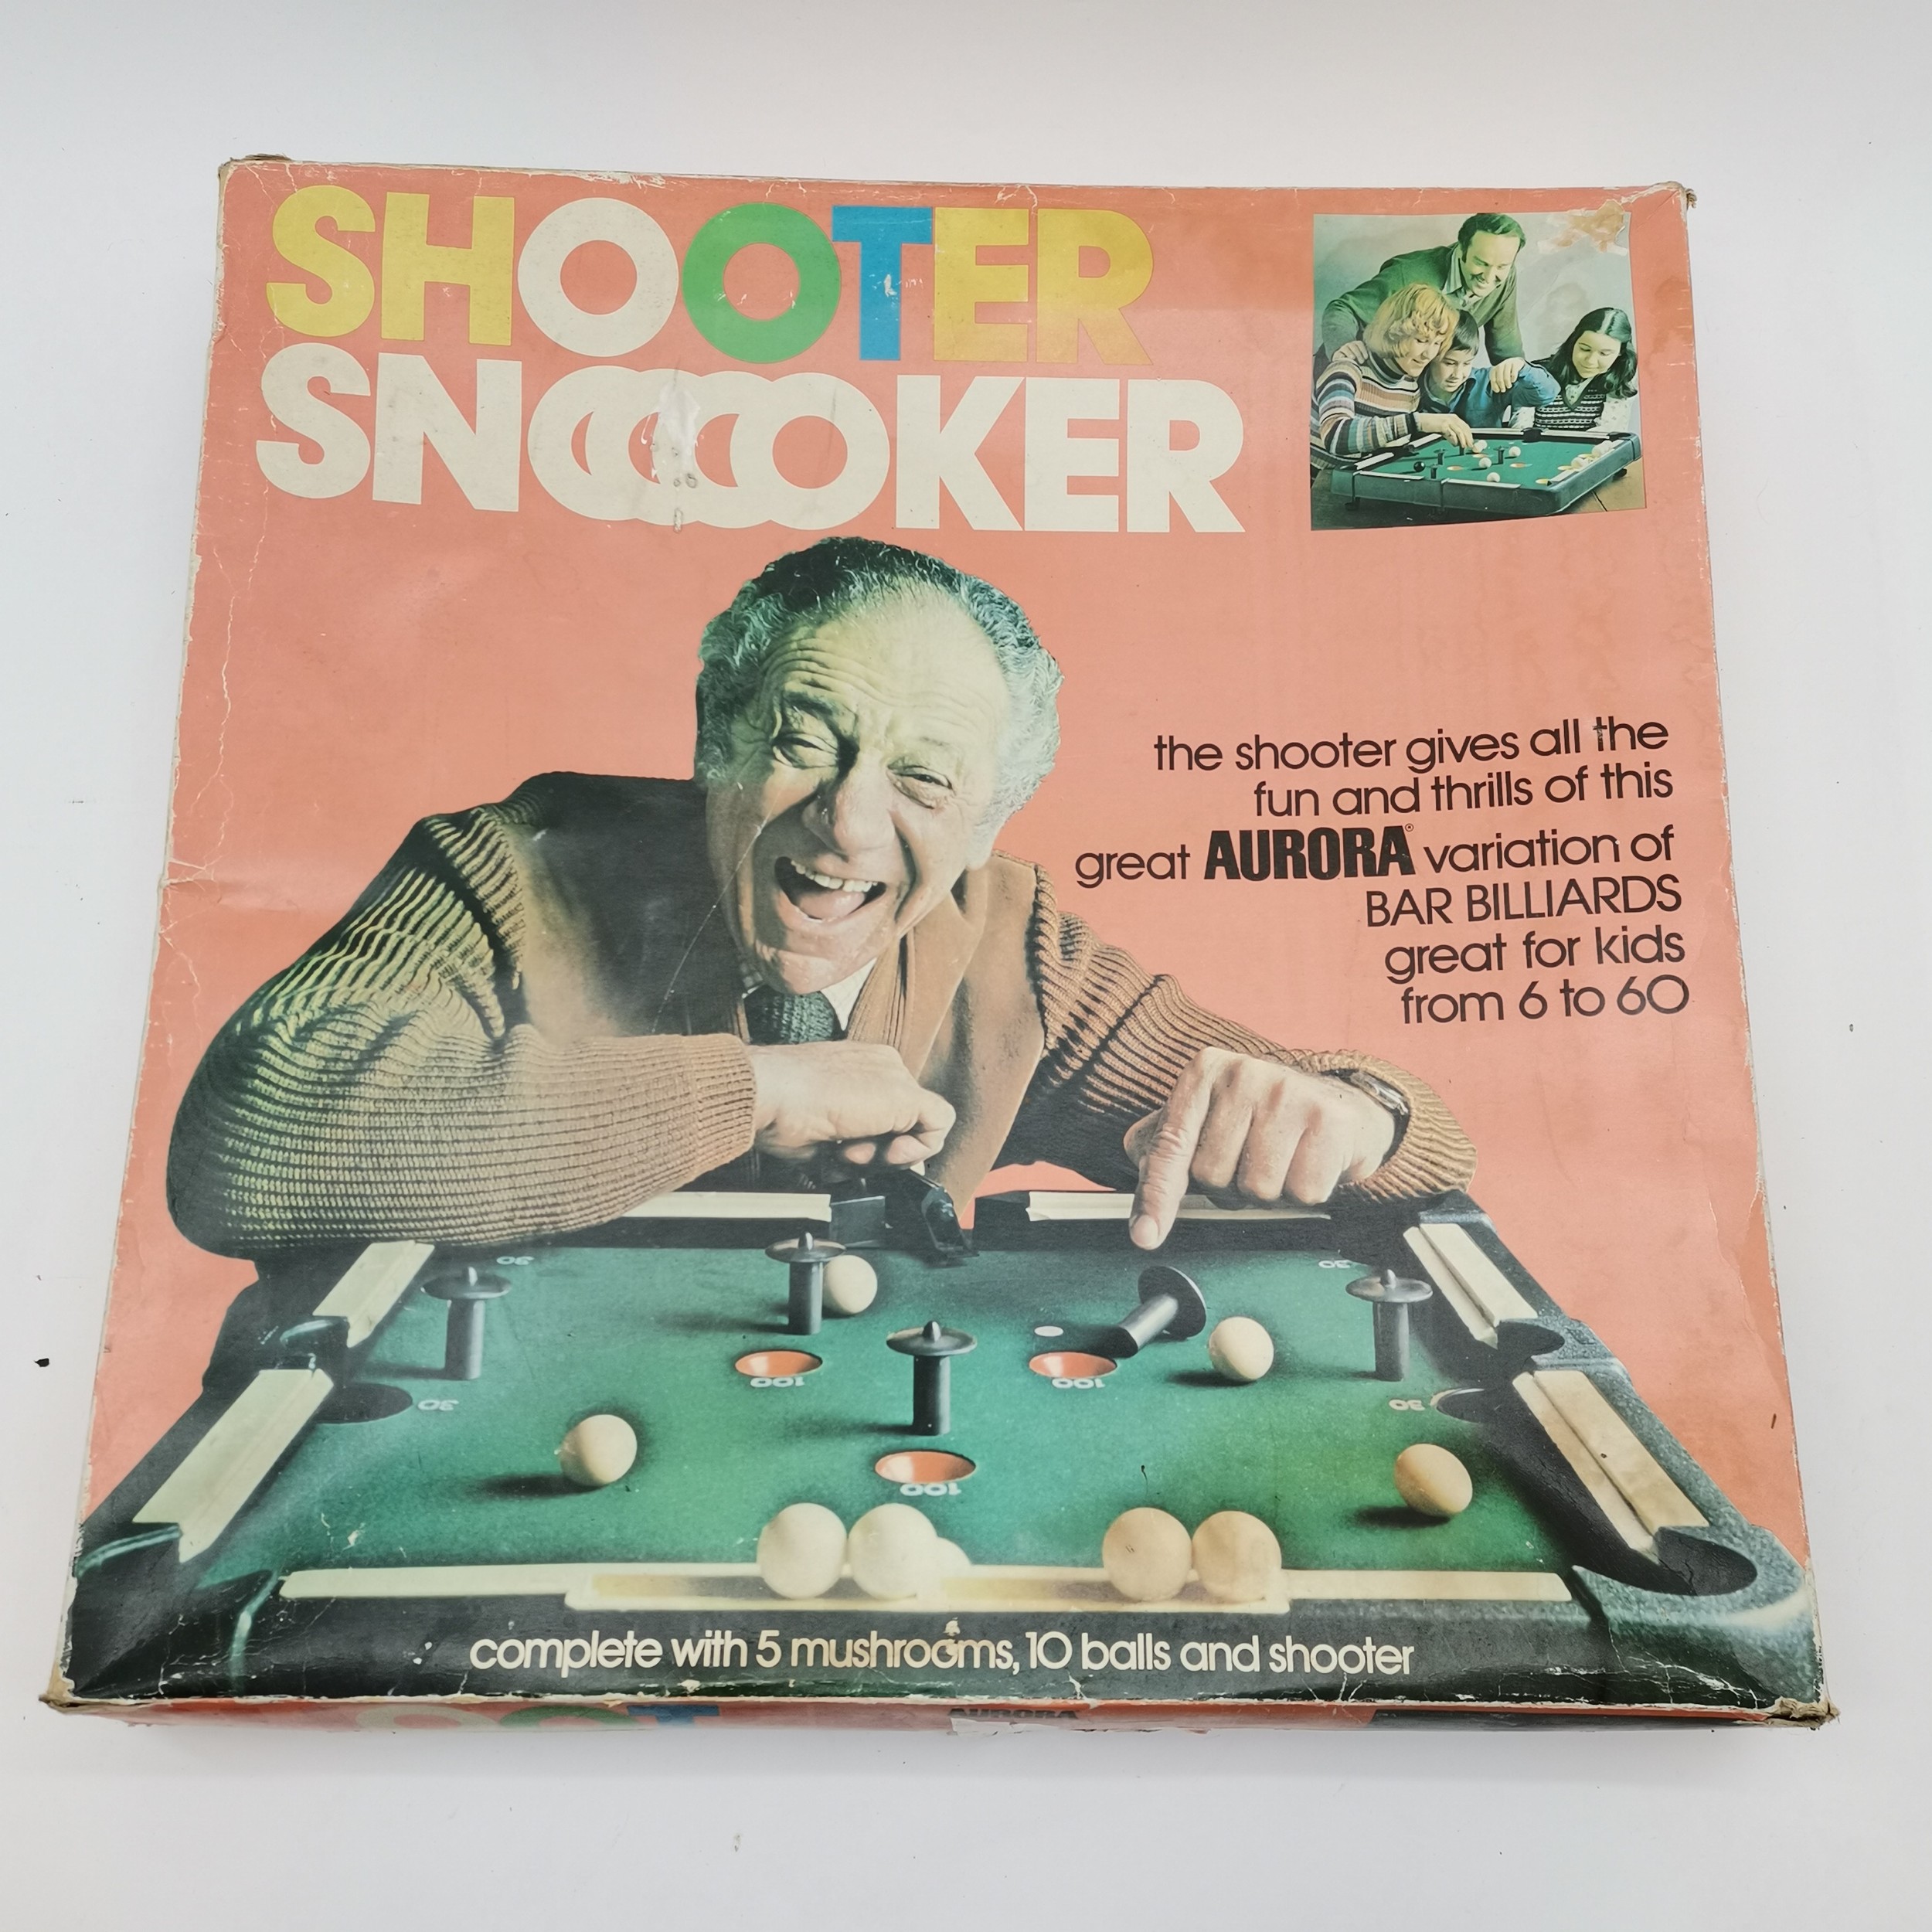 Sid James boxed Aurora Shooter Snooker - box 61cm square and has wear - Image 3 of 3